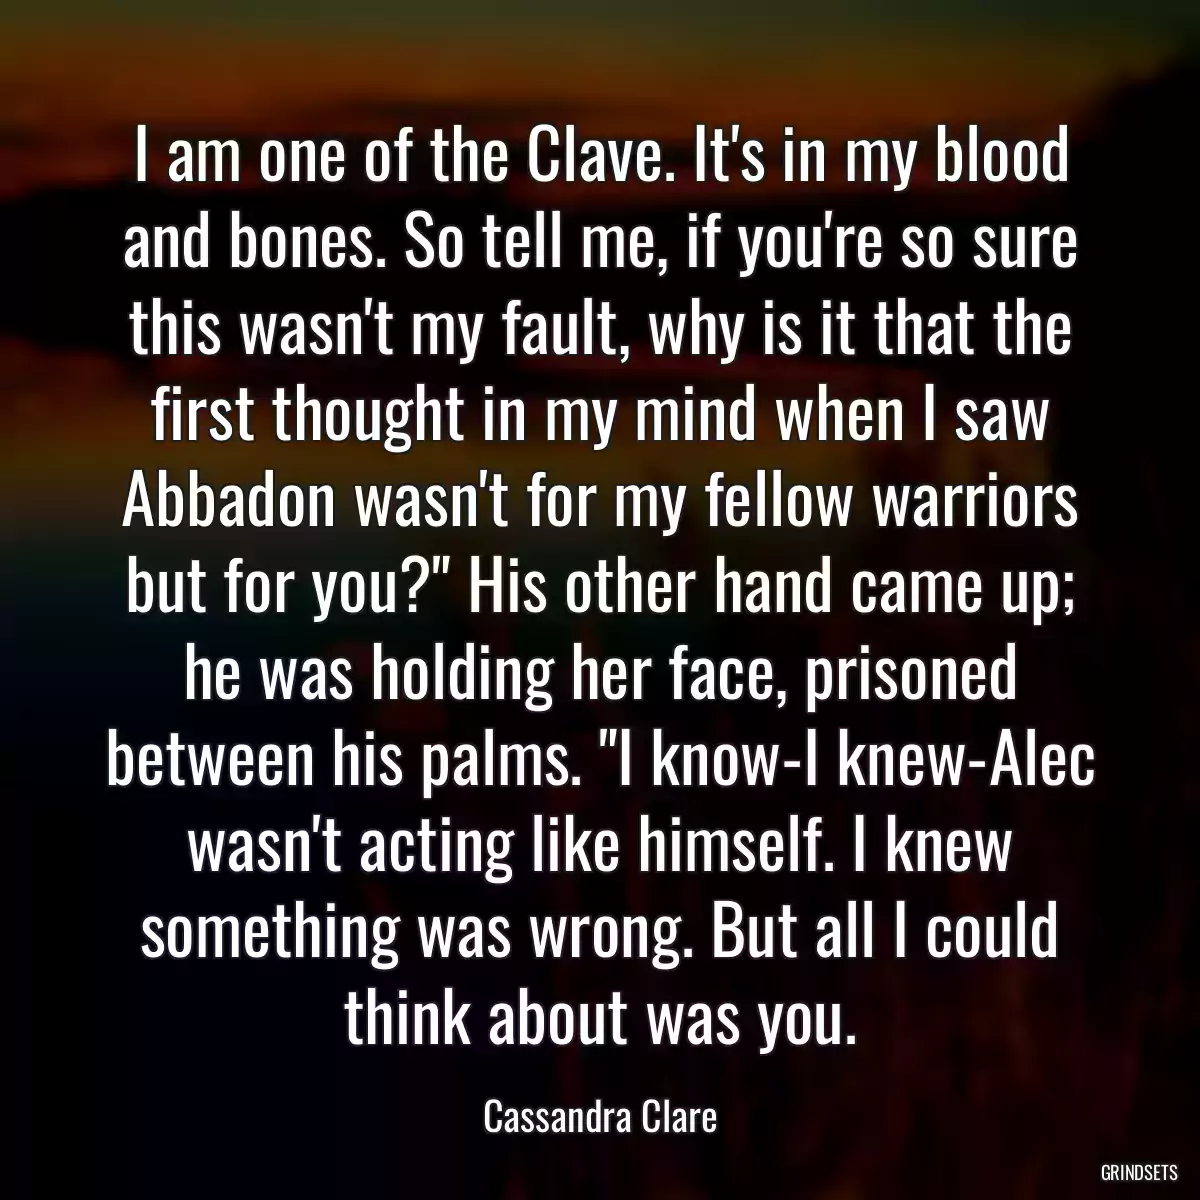 I am one of the Clave. It\'s in my blood and bones. So tell me, if you\'re so sure this wasn\'t my fault, why is it that the first thought in my mind when I saw Abbadon wasn\'t for my fellow warriors but for you?\